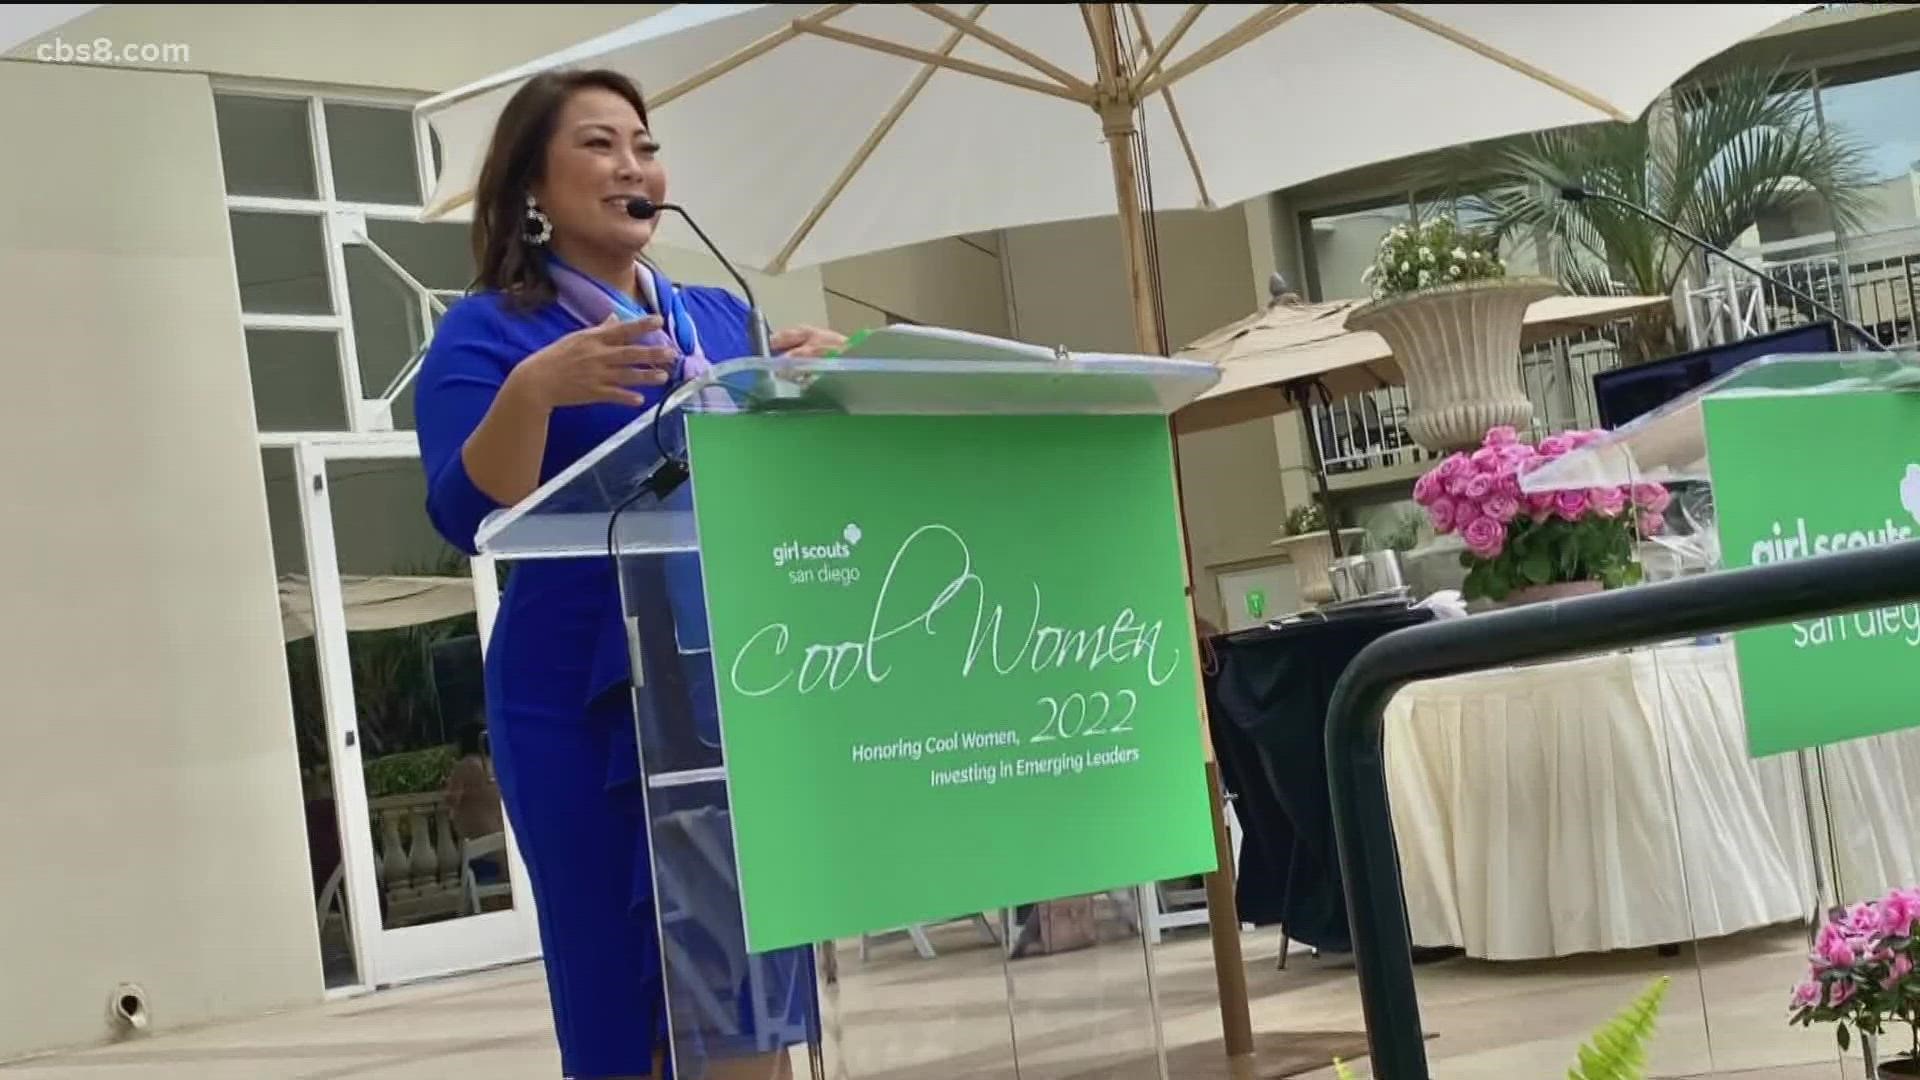 CBS 8 anchor Marcella Lee hosted the event and received a special surprise.